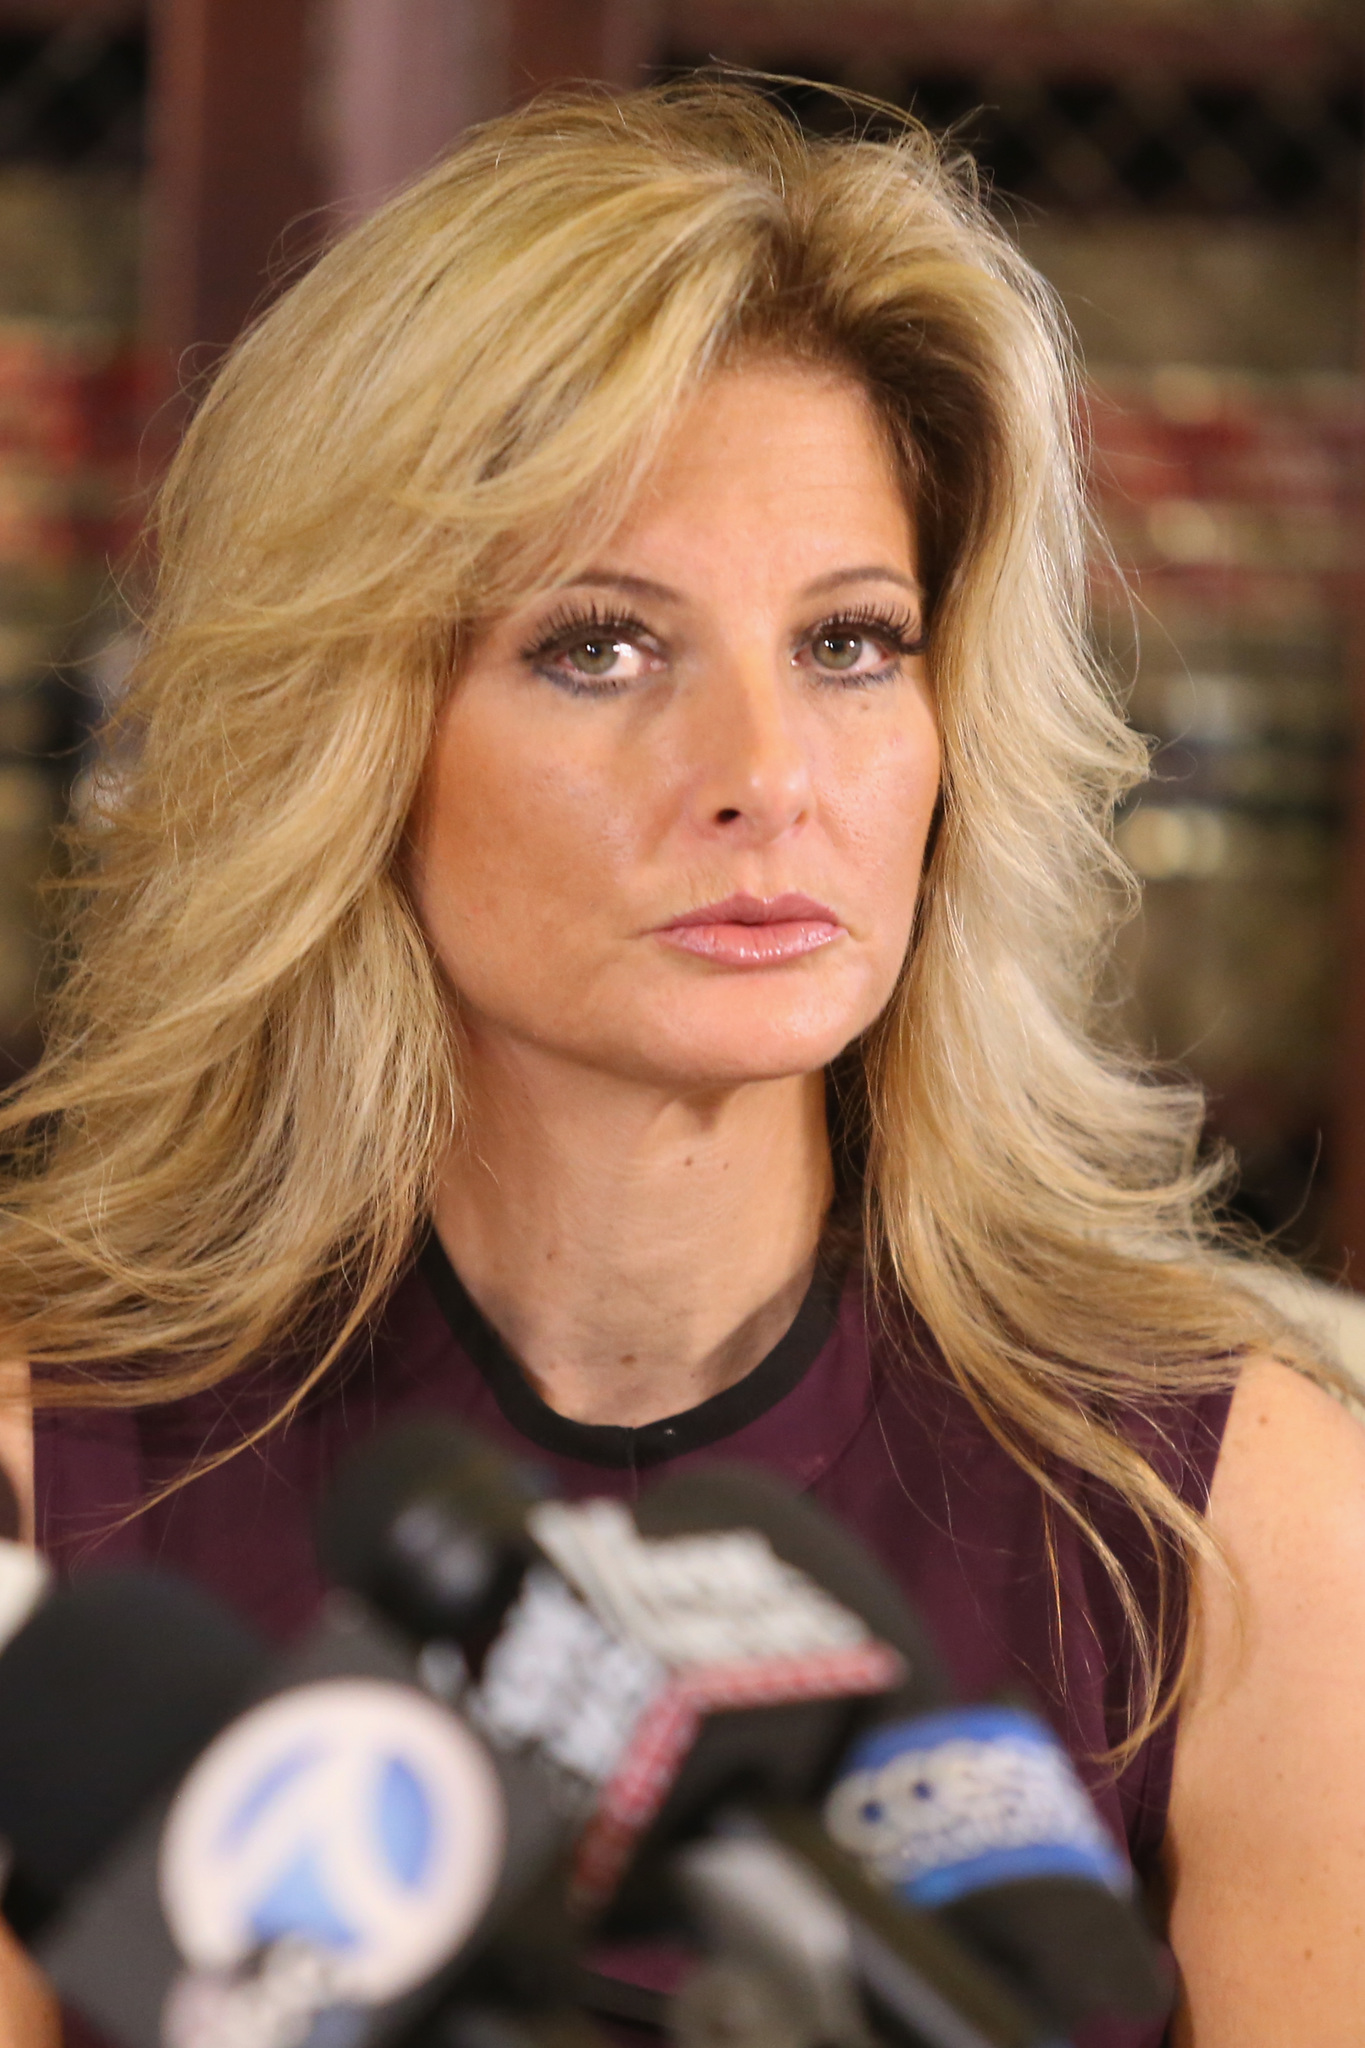 daisy giddings recommends summer zervos pictures pic